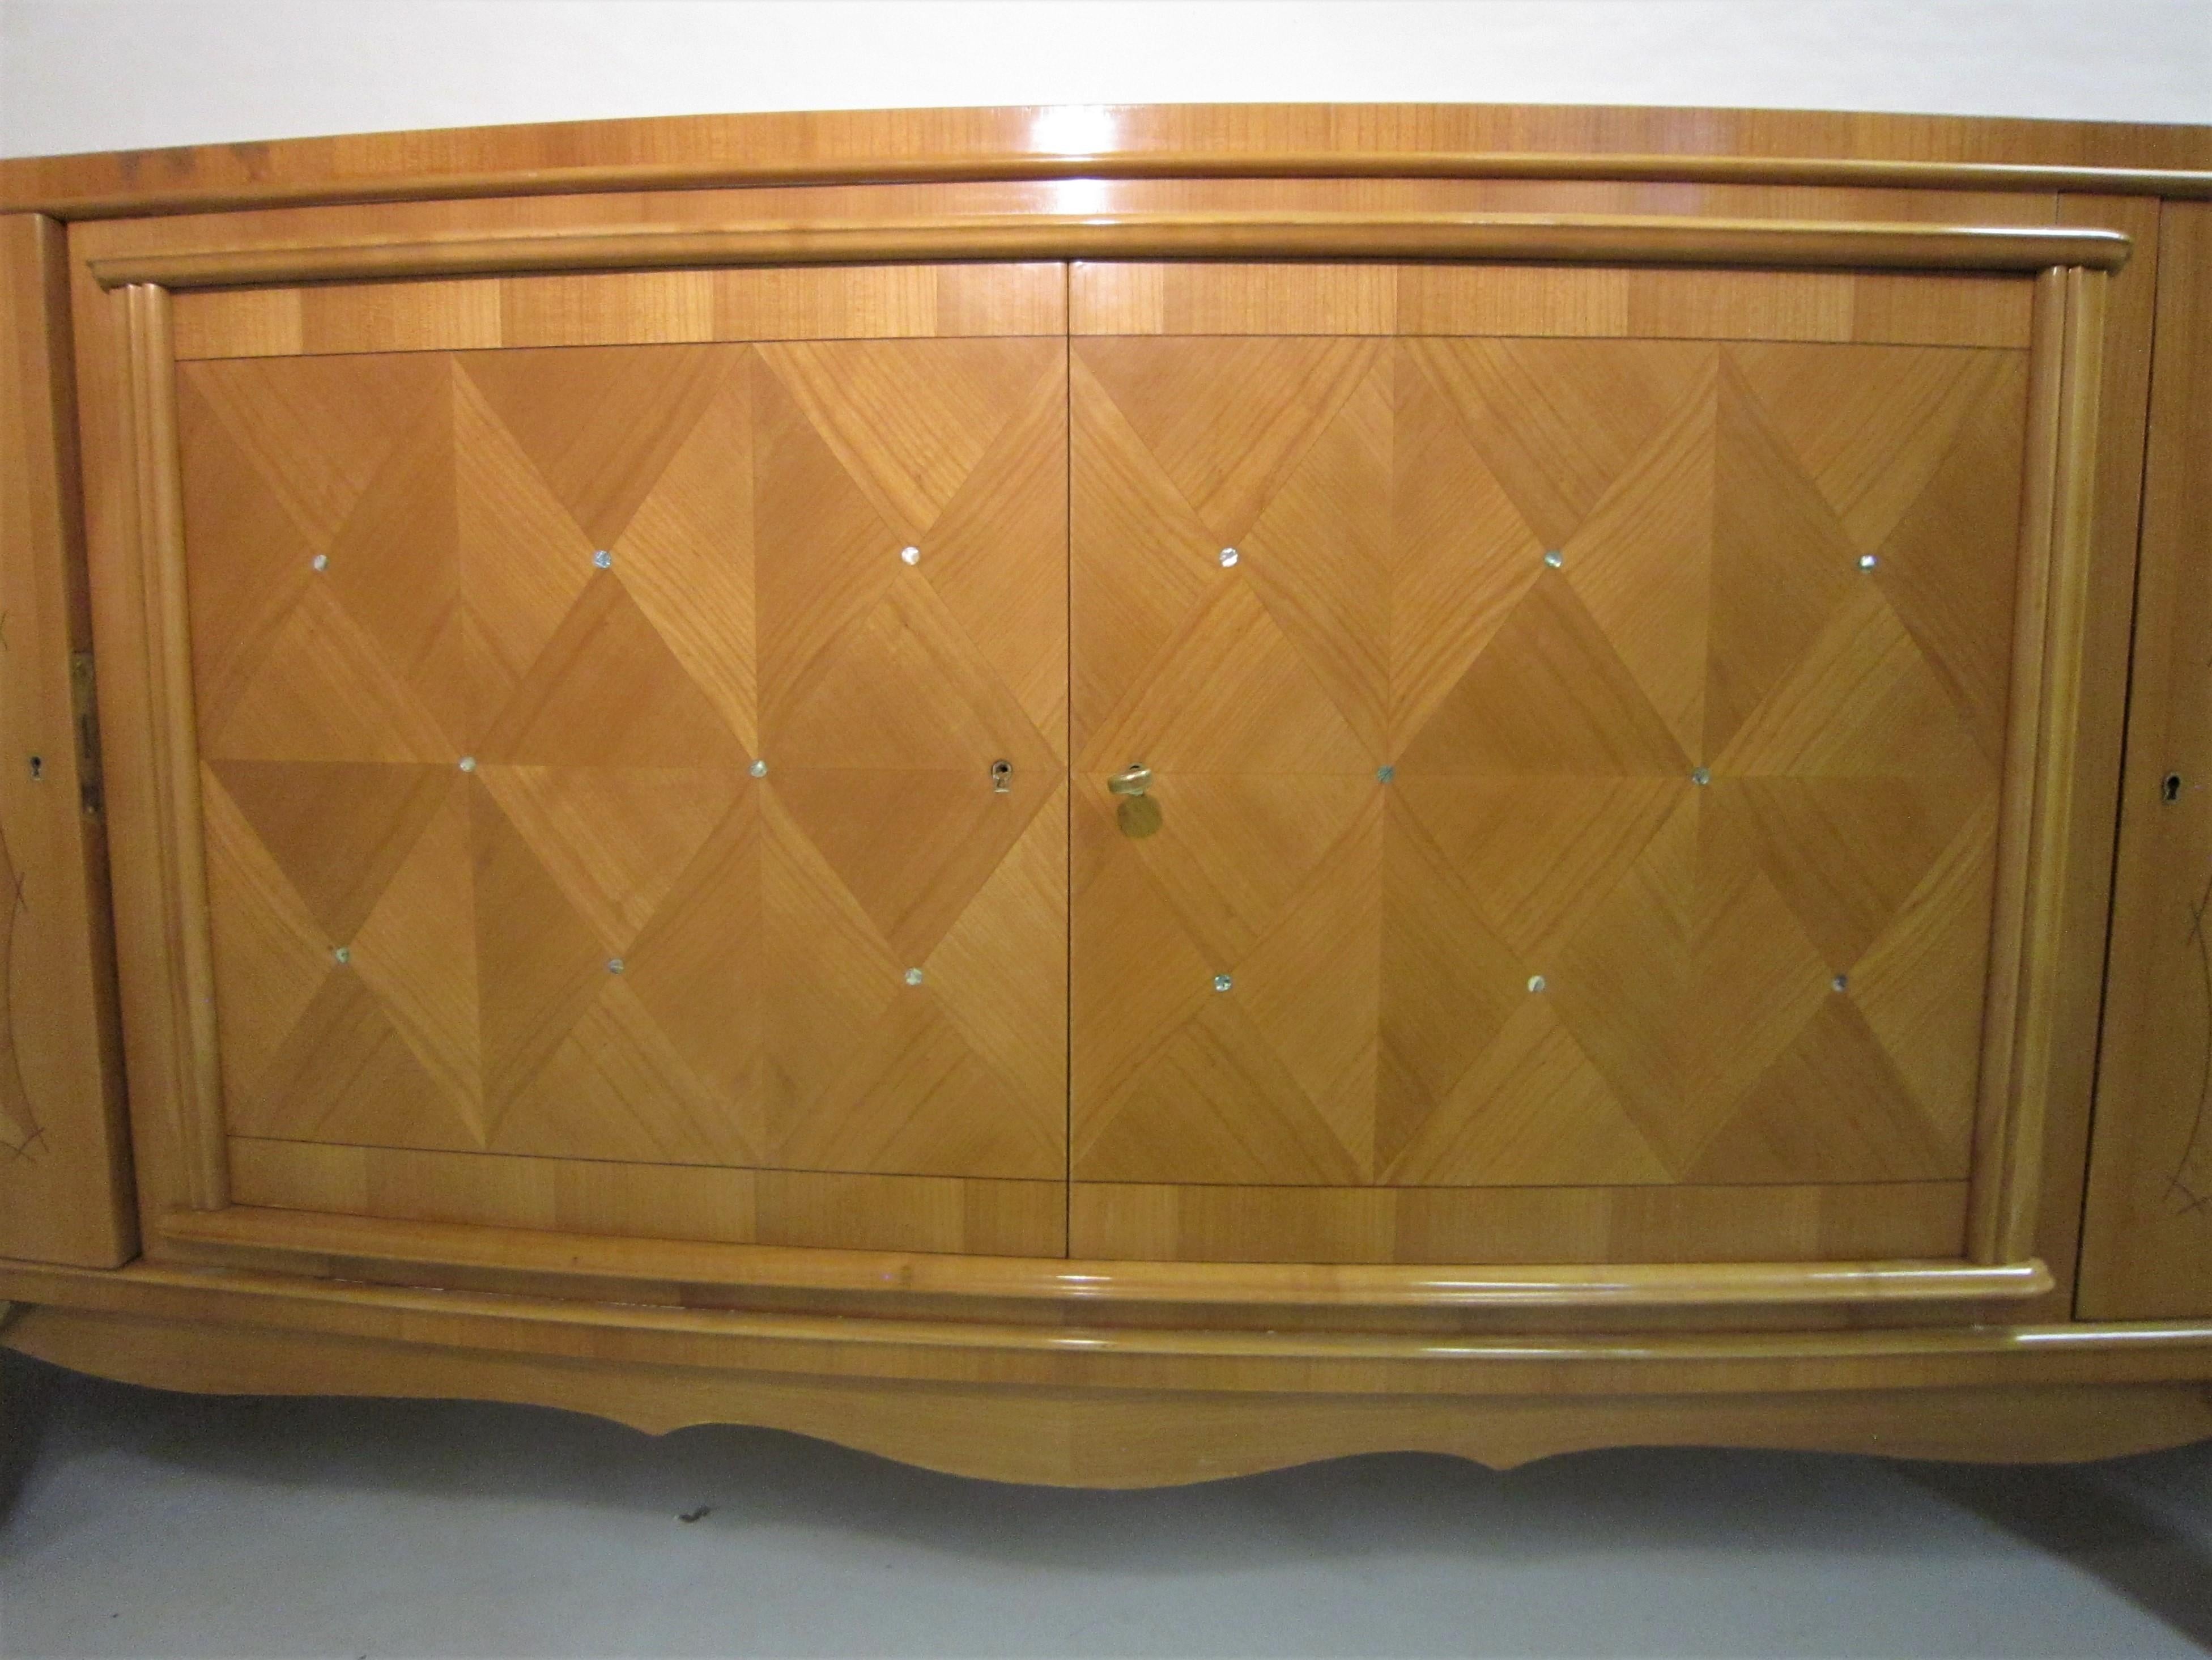 Art Deco 1940s Sycamore Credenza in Parquetry Inlay, Attributed to Andre Arbus